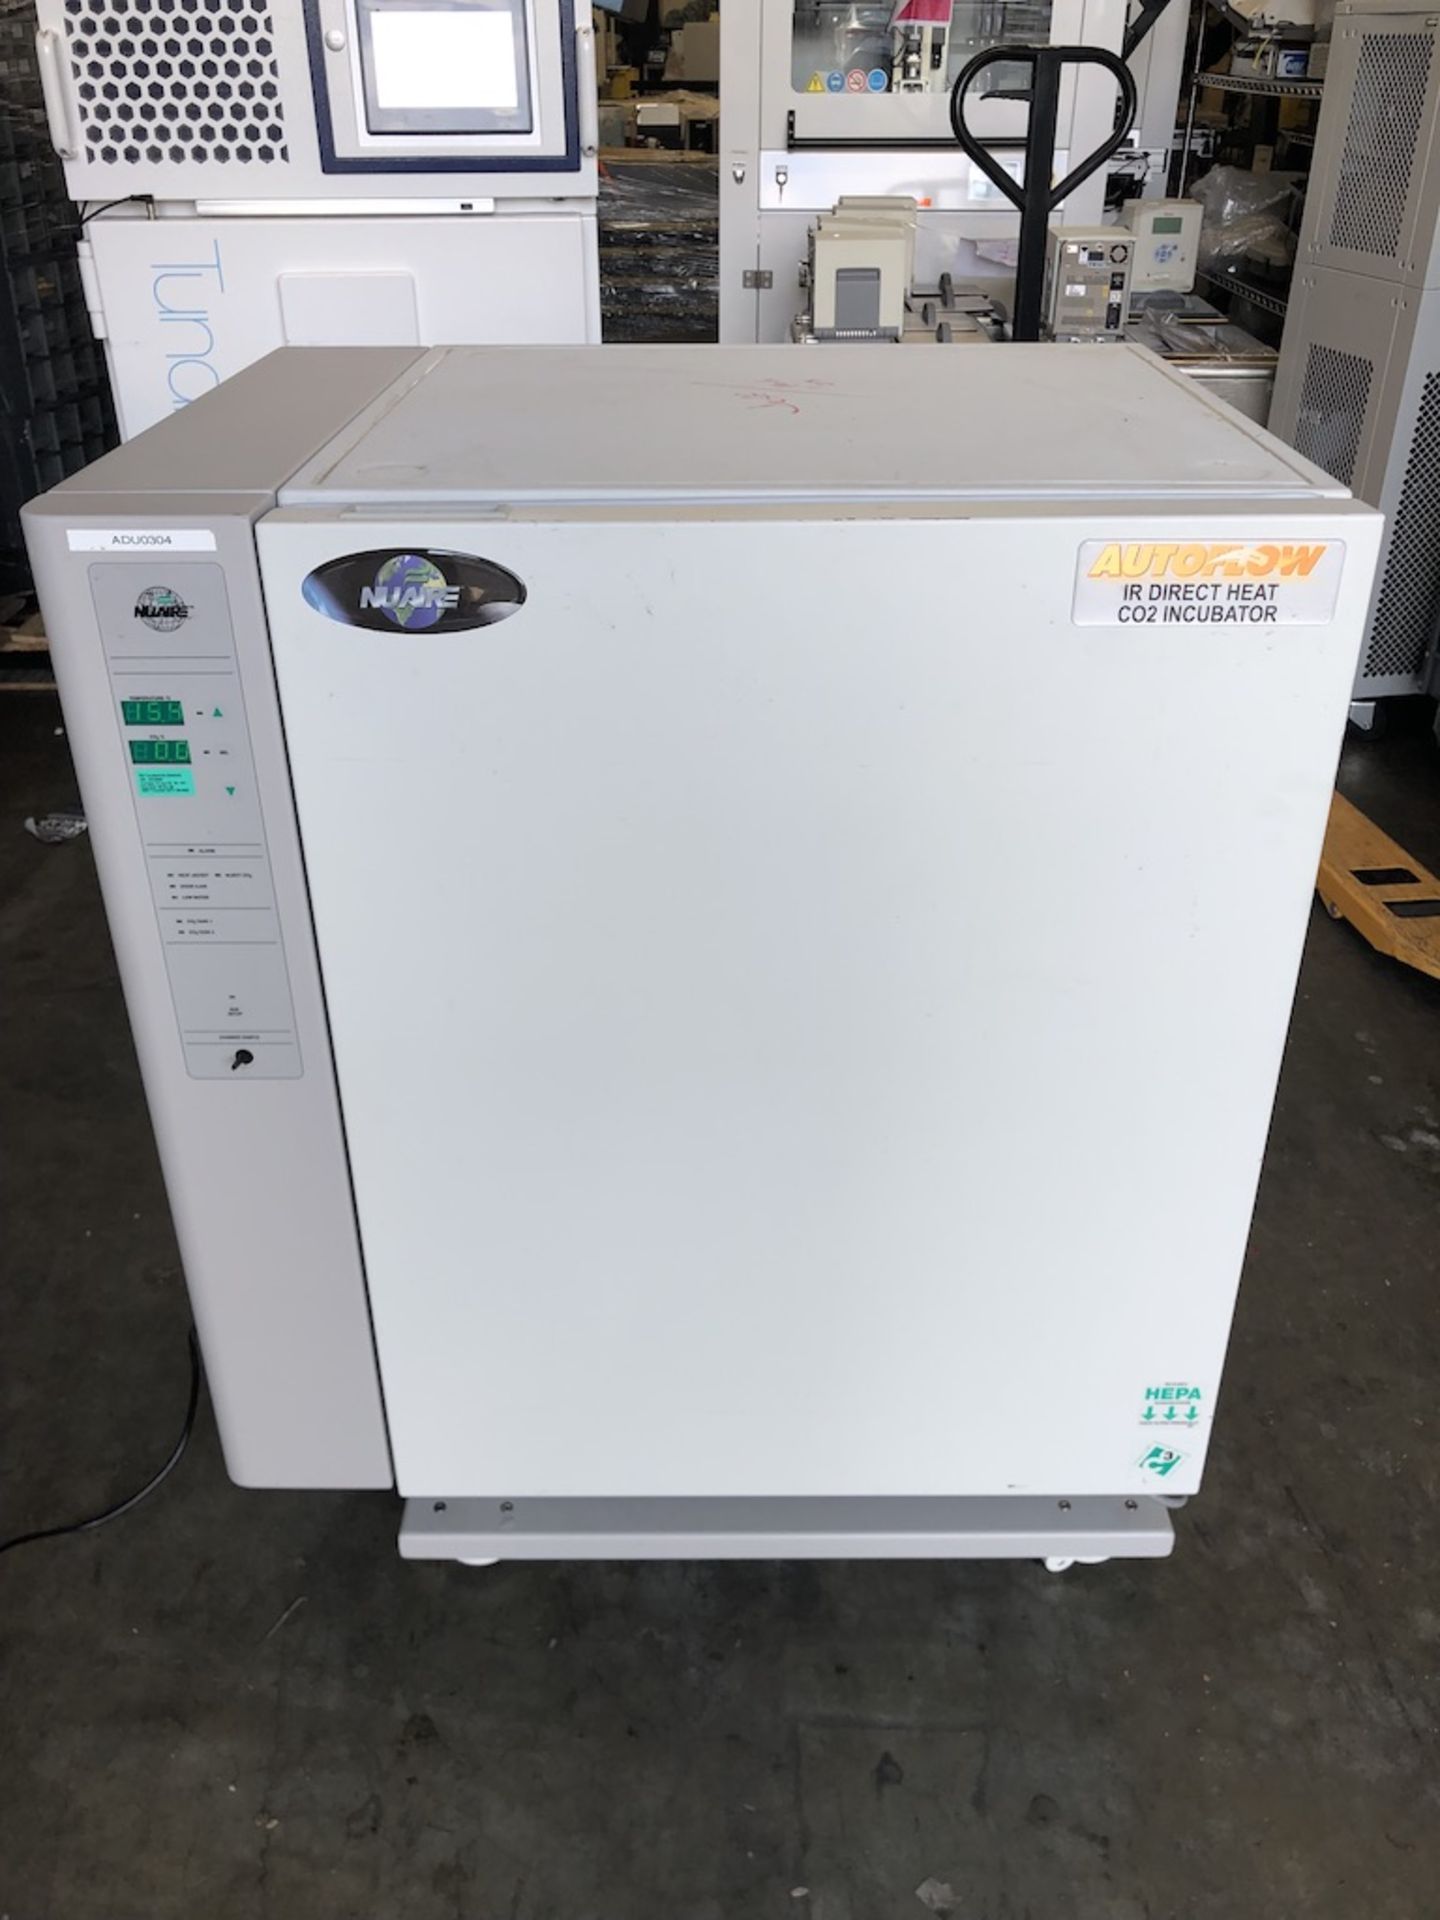 NUAIRE NU-4750 WATER JACKETED CO2 INCUBATOR SERIES 10, 115 AC, 60Hz